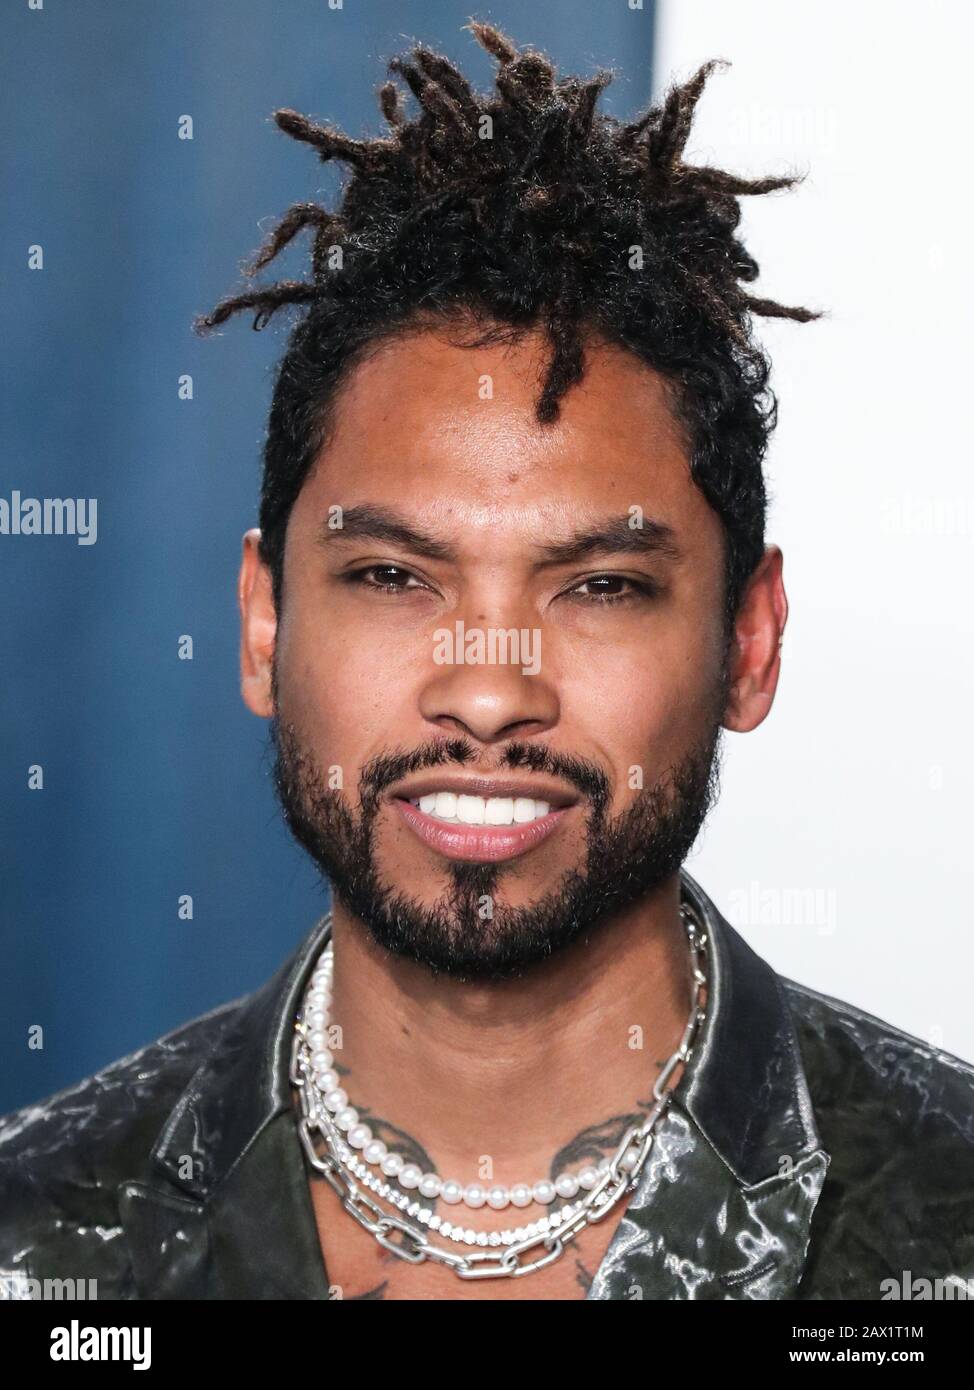 BEVERLY HILLS, LOS ANGELES, CALIFORNIA, USA - FEBRUARY 09: Miguel arrives at the 2020 Vanity Fair Oscar Party held at the Wallis Annenberg Center for the Performing Arts on February 9, 2020 in Beverly Hills, Los Angeles, California, United States. (Photo by Xavier Collin/Image Press Agency) Stock Photo